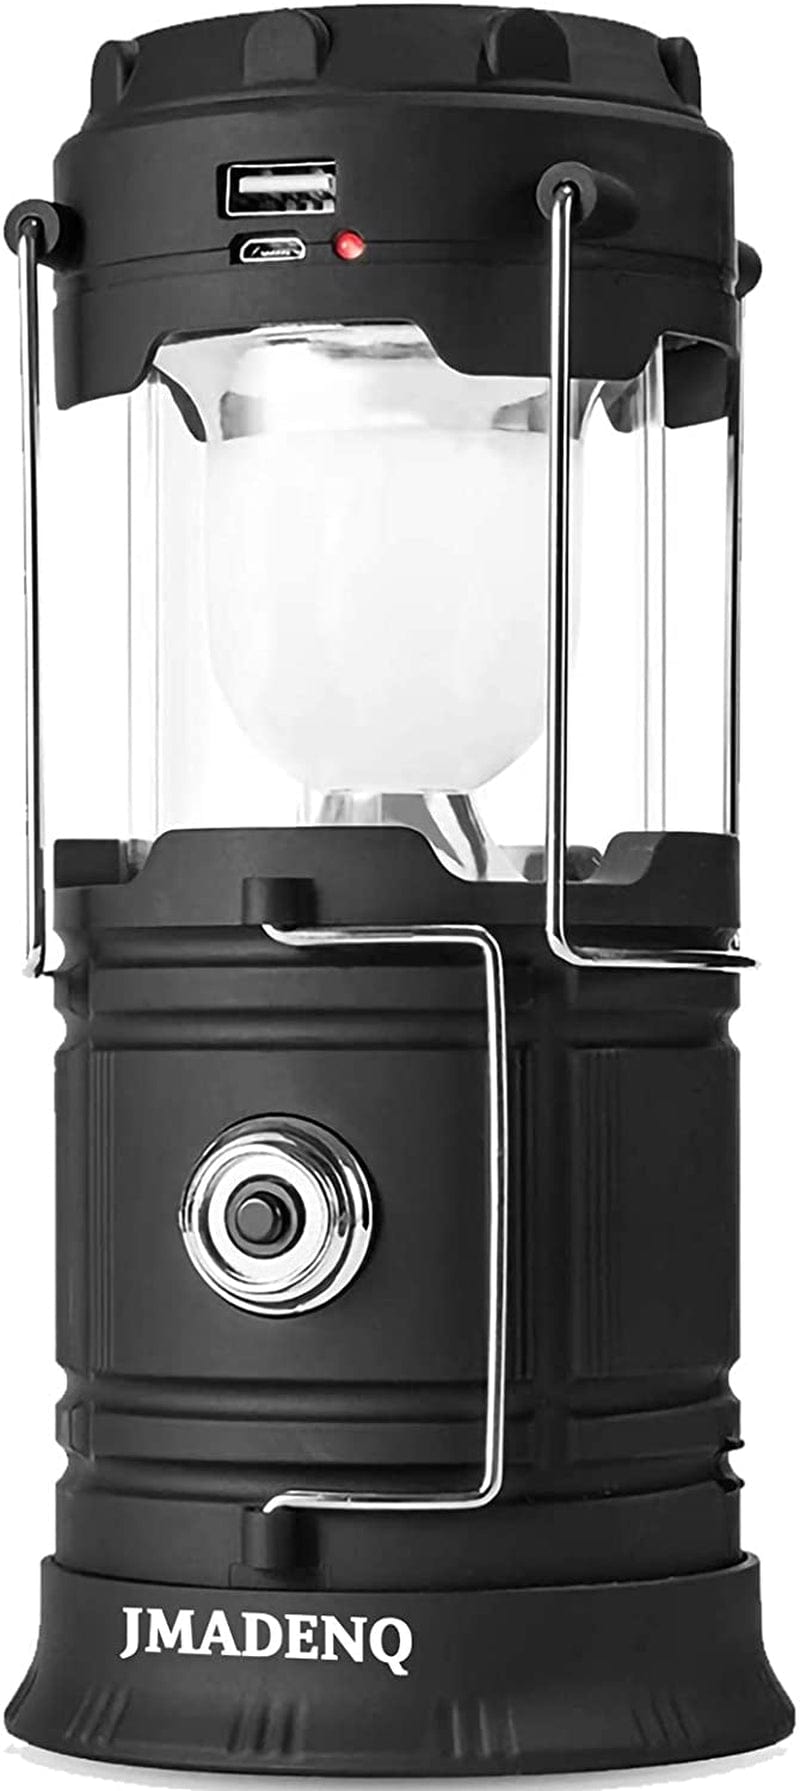 Lanterns, Camping Lantern, Solar Lantern Flashlights Charging for Phone, USB Rechargeable Led Camping Lantern, Collapsible & Portable for Emergency, Hurricanes, Power Outage, Storm (2 Pack) Home & Garden > Lighting > Lamps RXMYO 1  